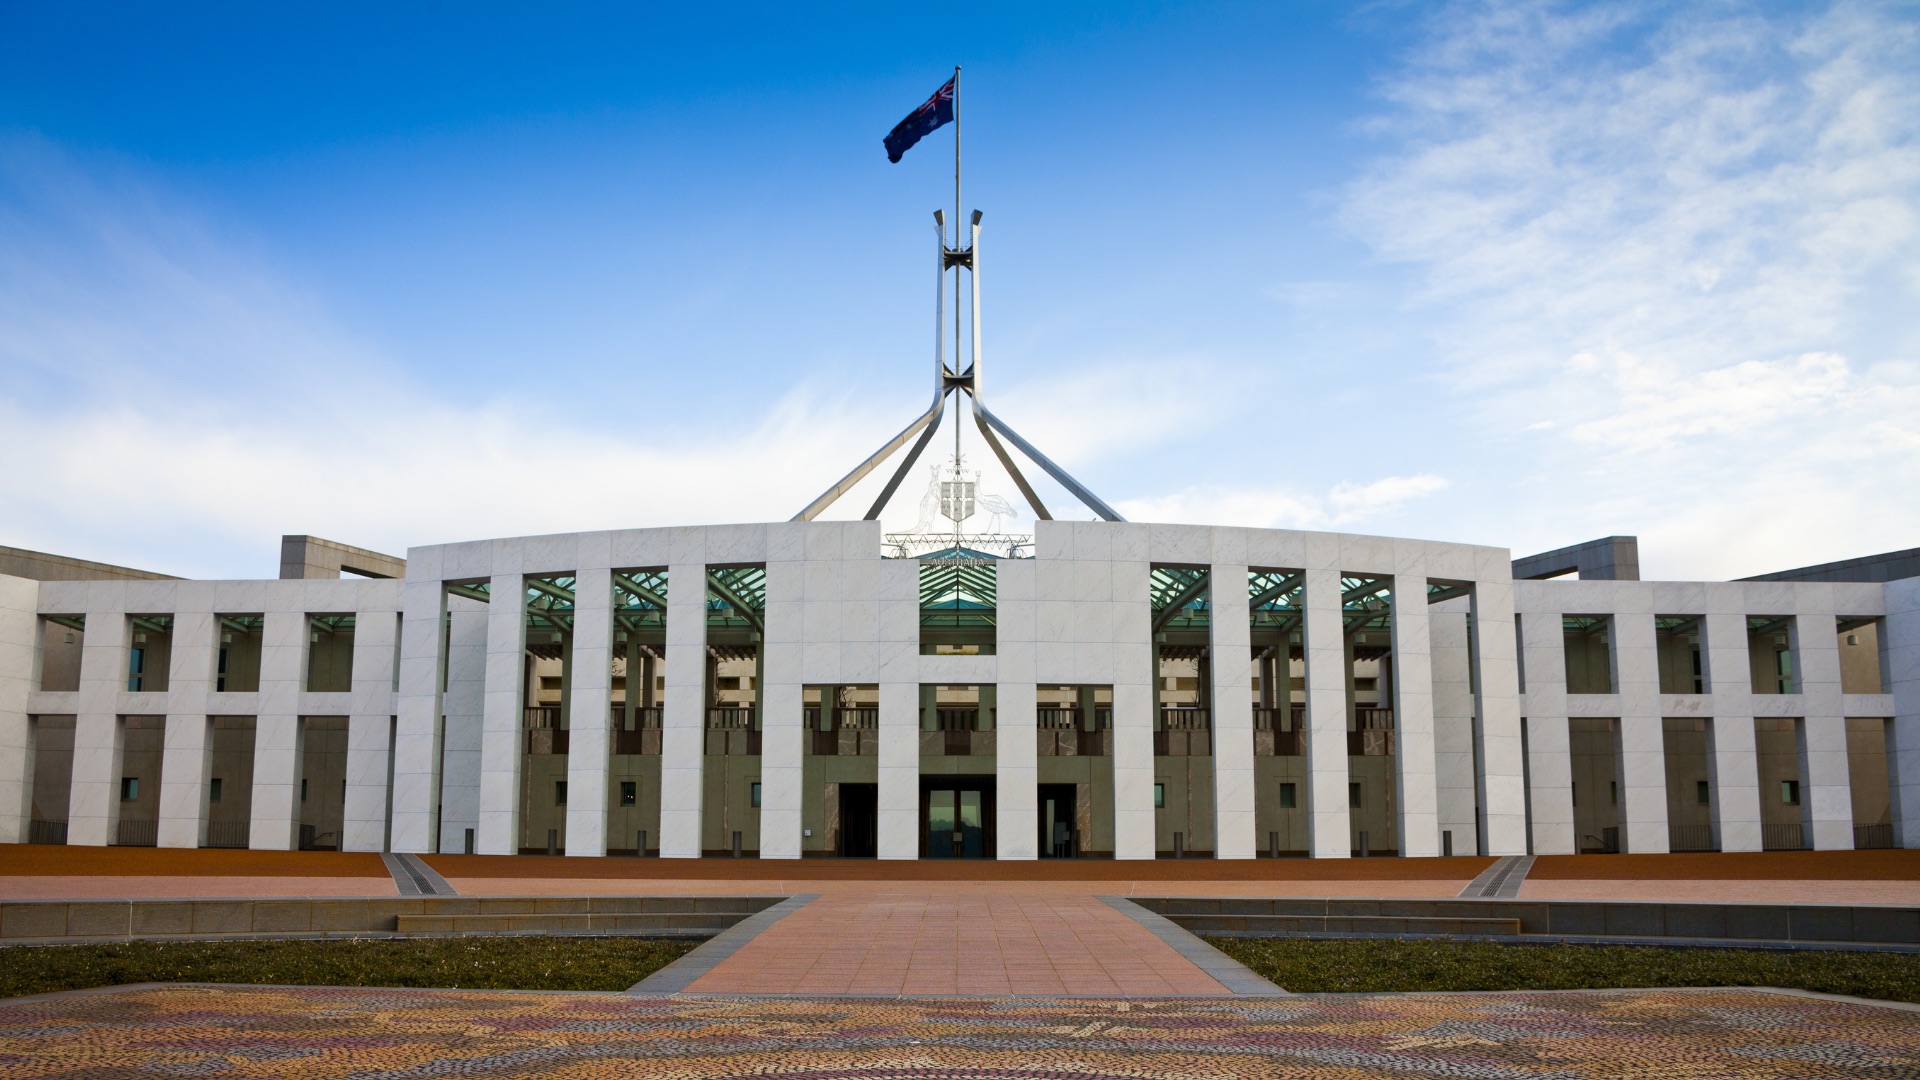 Australian government galvanises digital transformation and skills training with small business tax deductions - Parliament